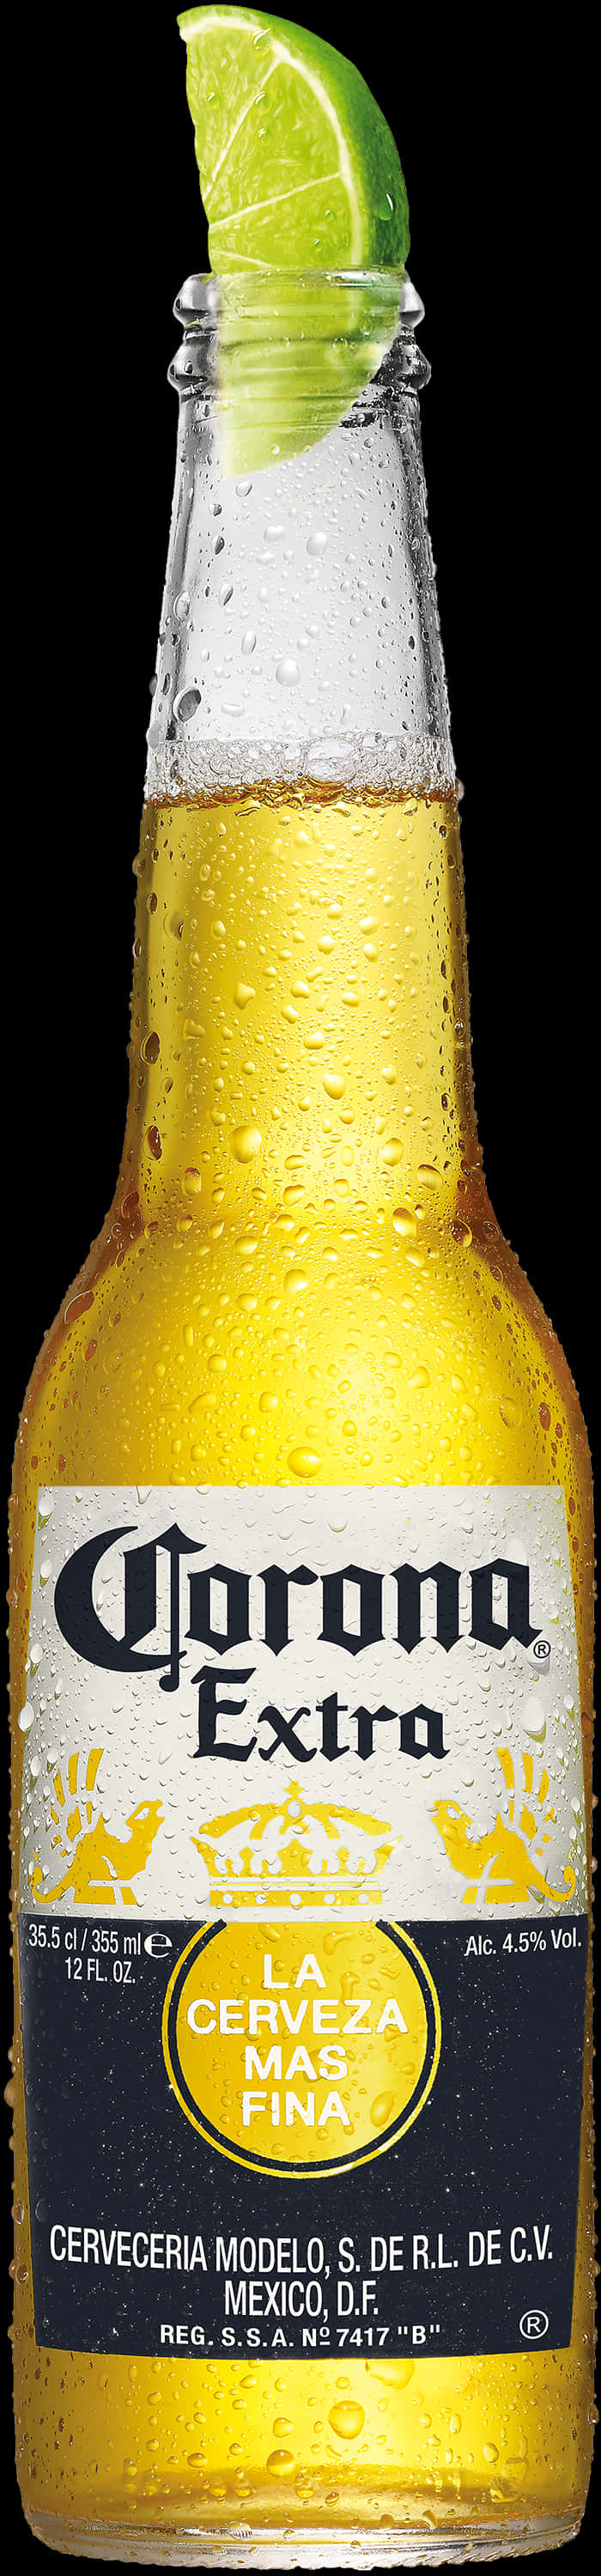 Corona Extra Beer Bottle With Lime